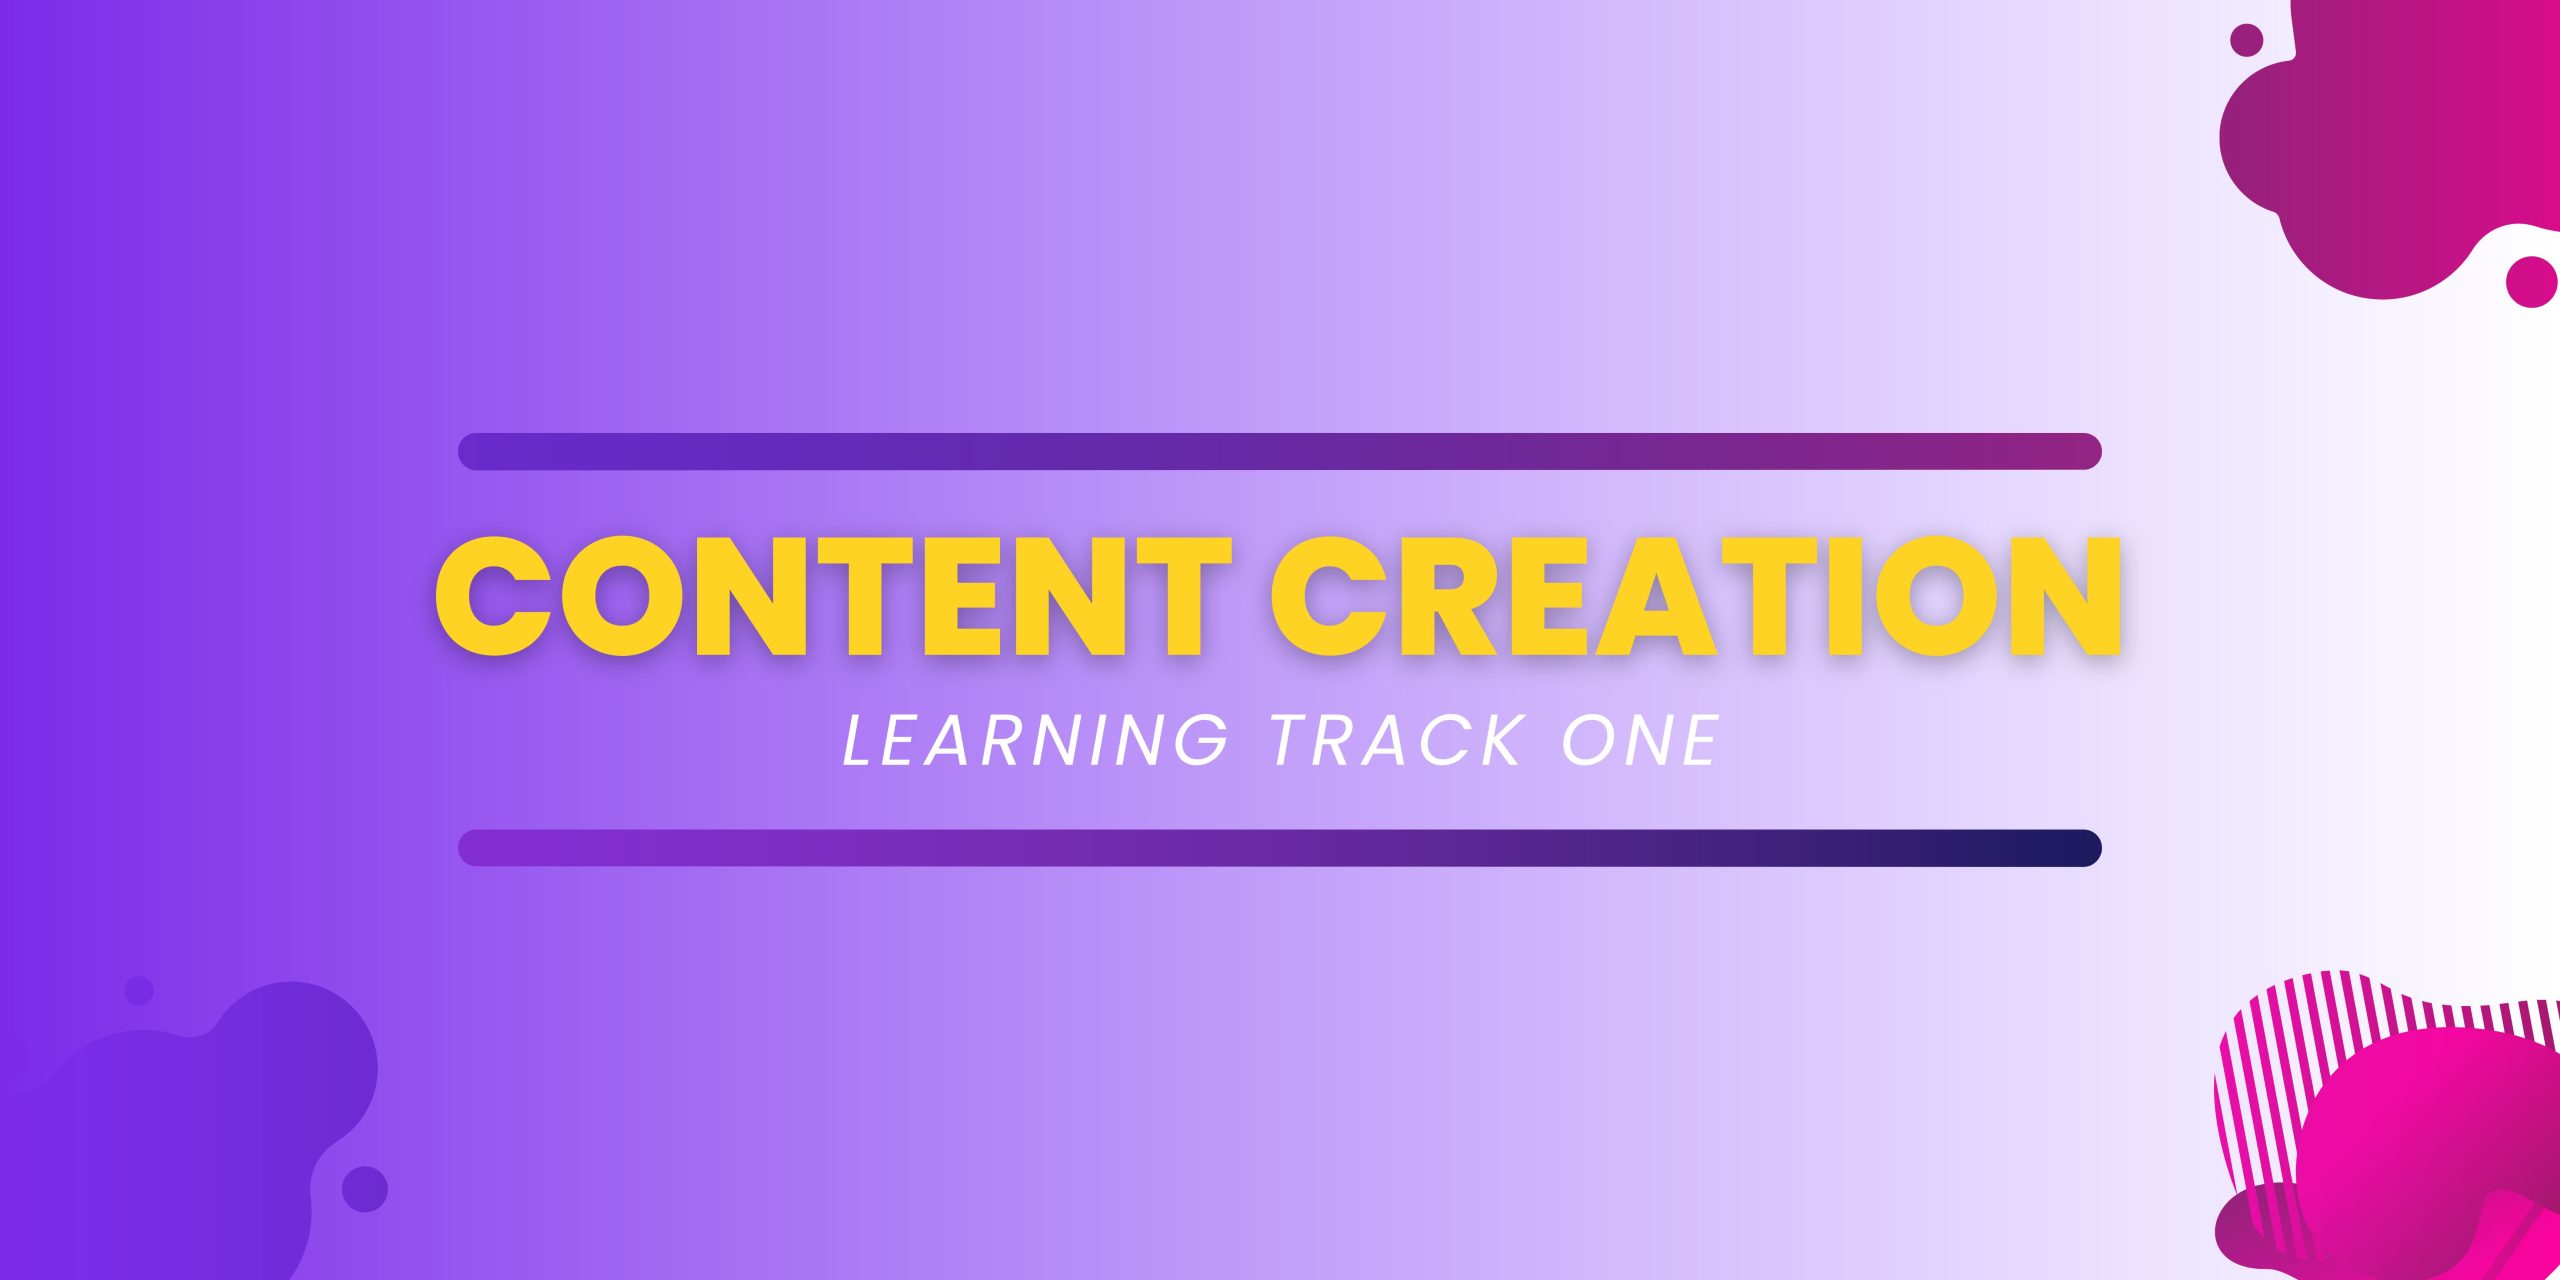 Content Creation Learning Track 1